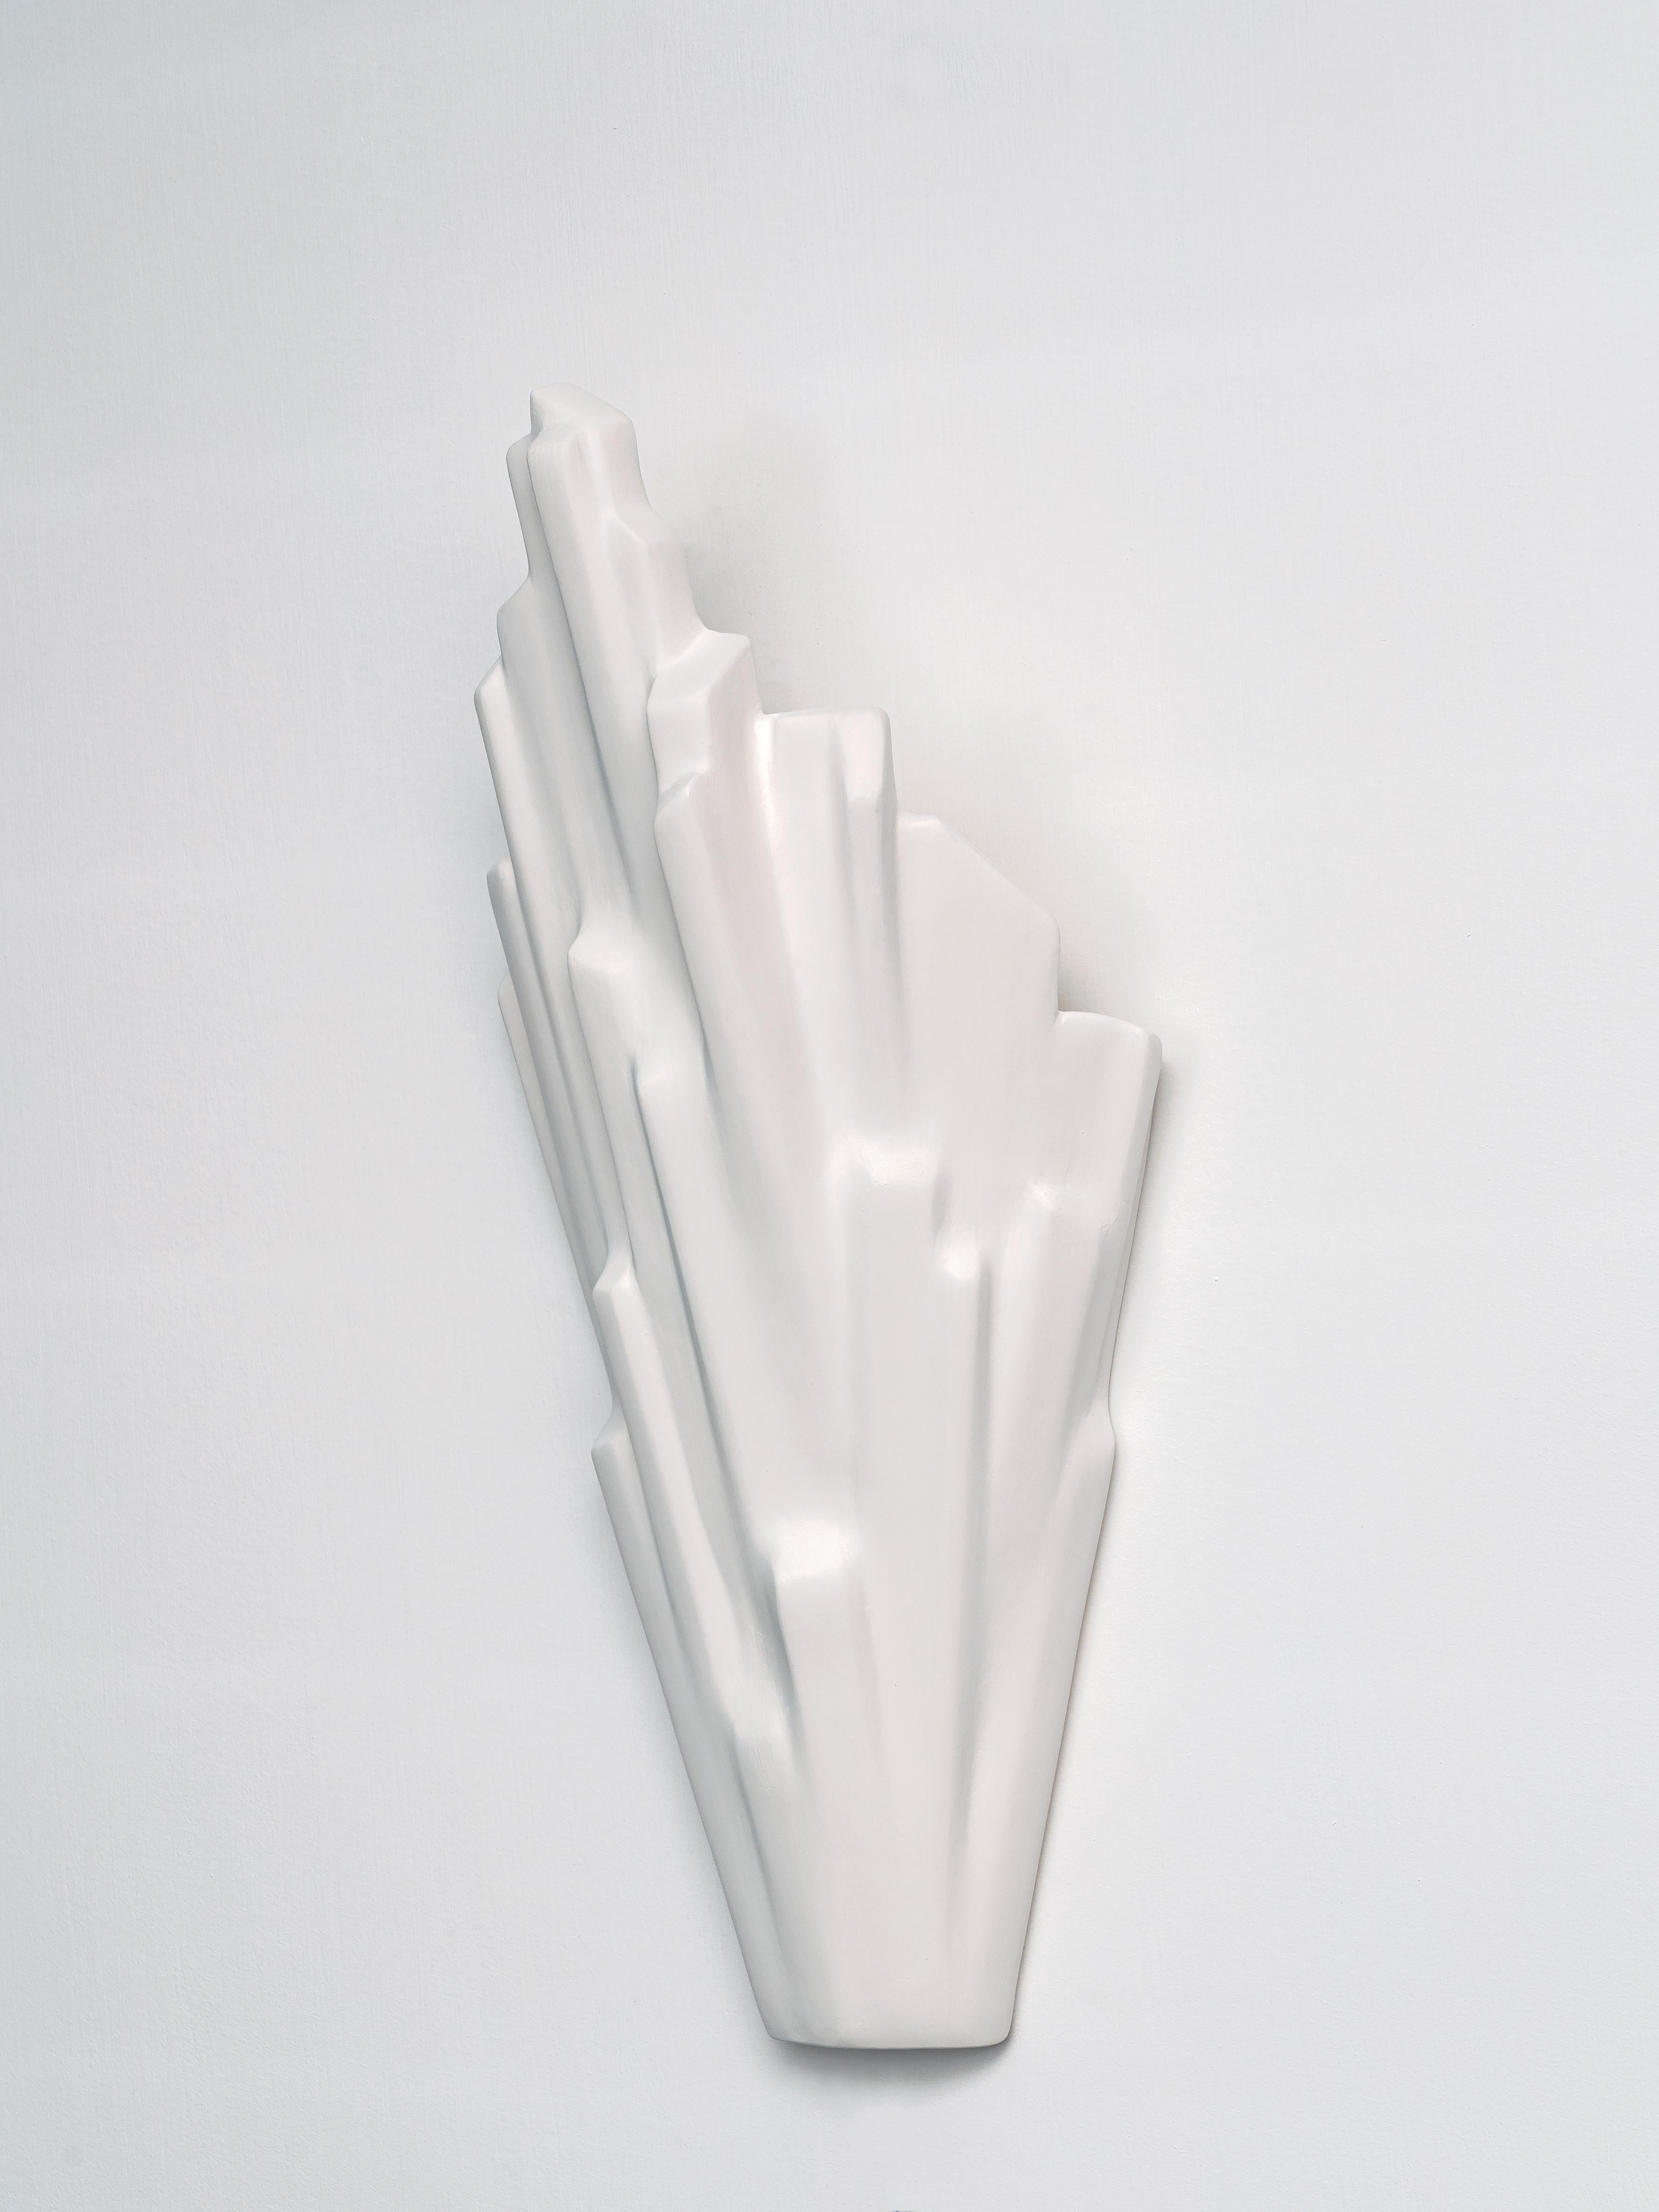 Organic Modern Sinan Contemporary Wall Sconce in White Plaster, left version, Benediko For Sale